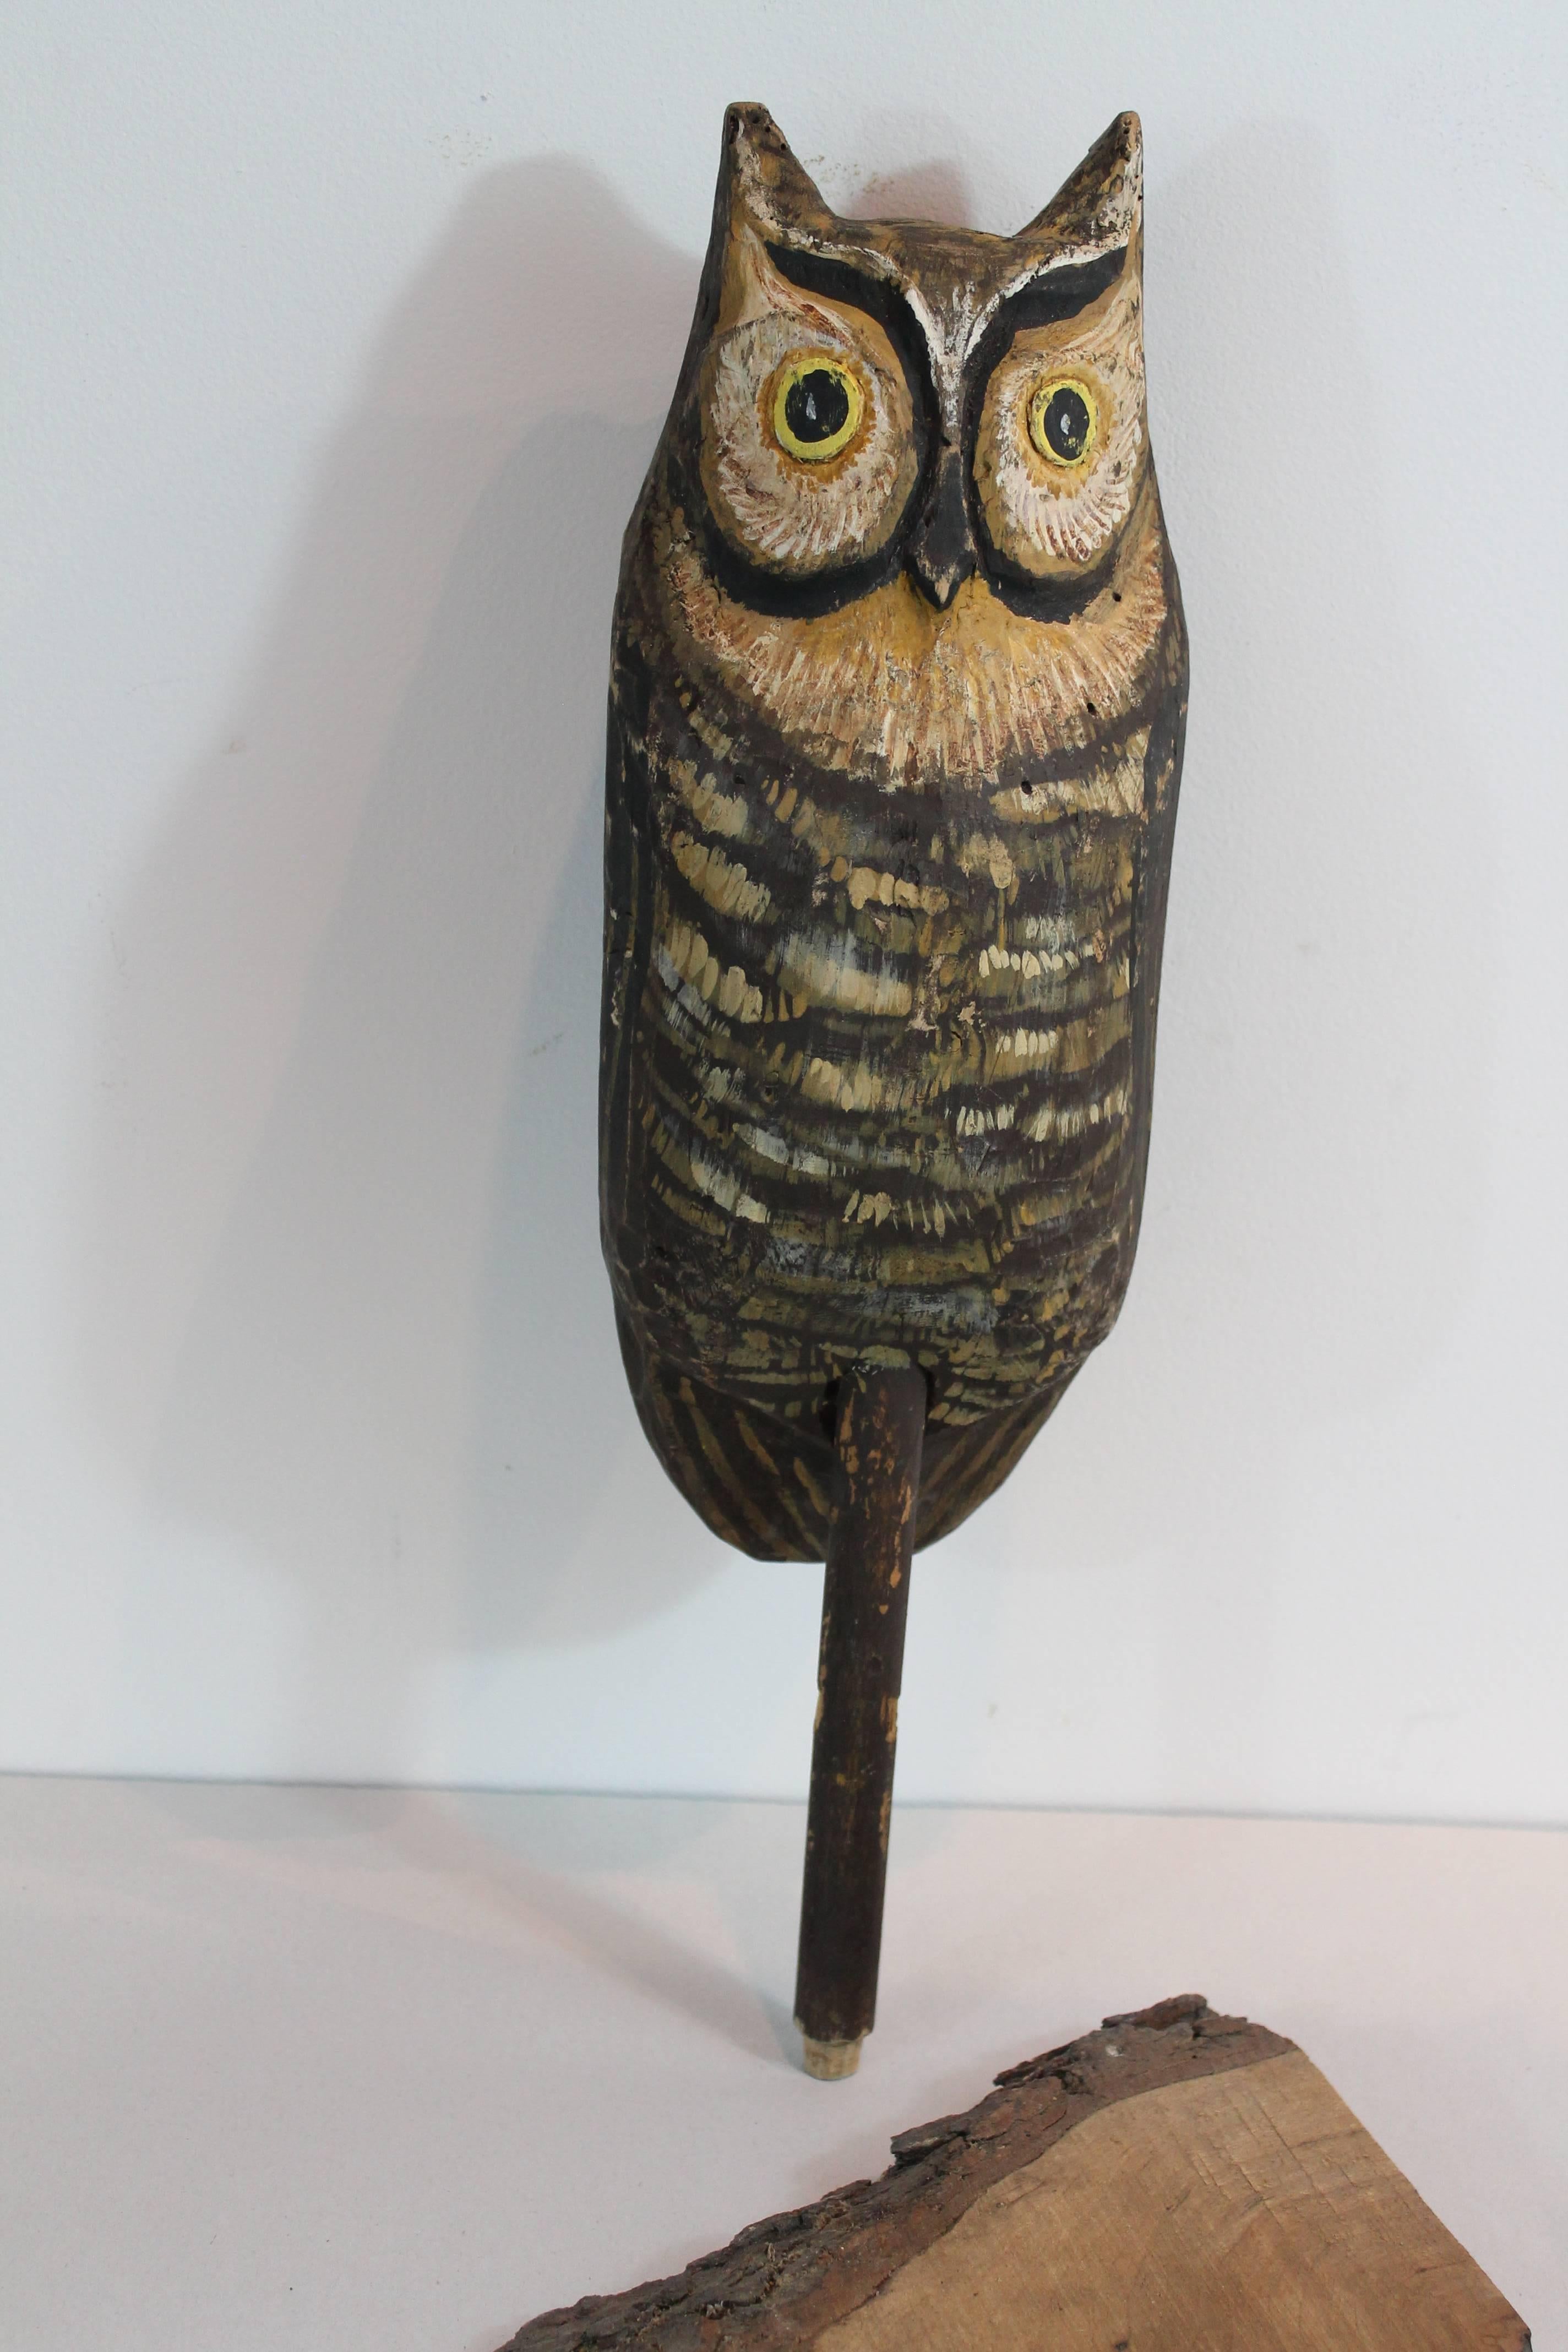 Wonderfully graphic carved folk art owl decoy.
Nice dimension and great paint.
The support dowel slides into a non original log slice, as found.
Photo shows it removed, so could be easily mounted otherwise.